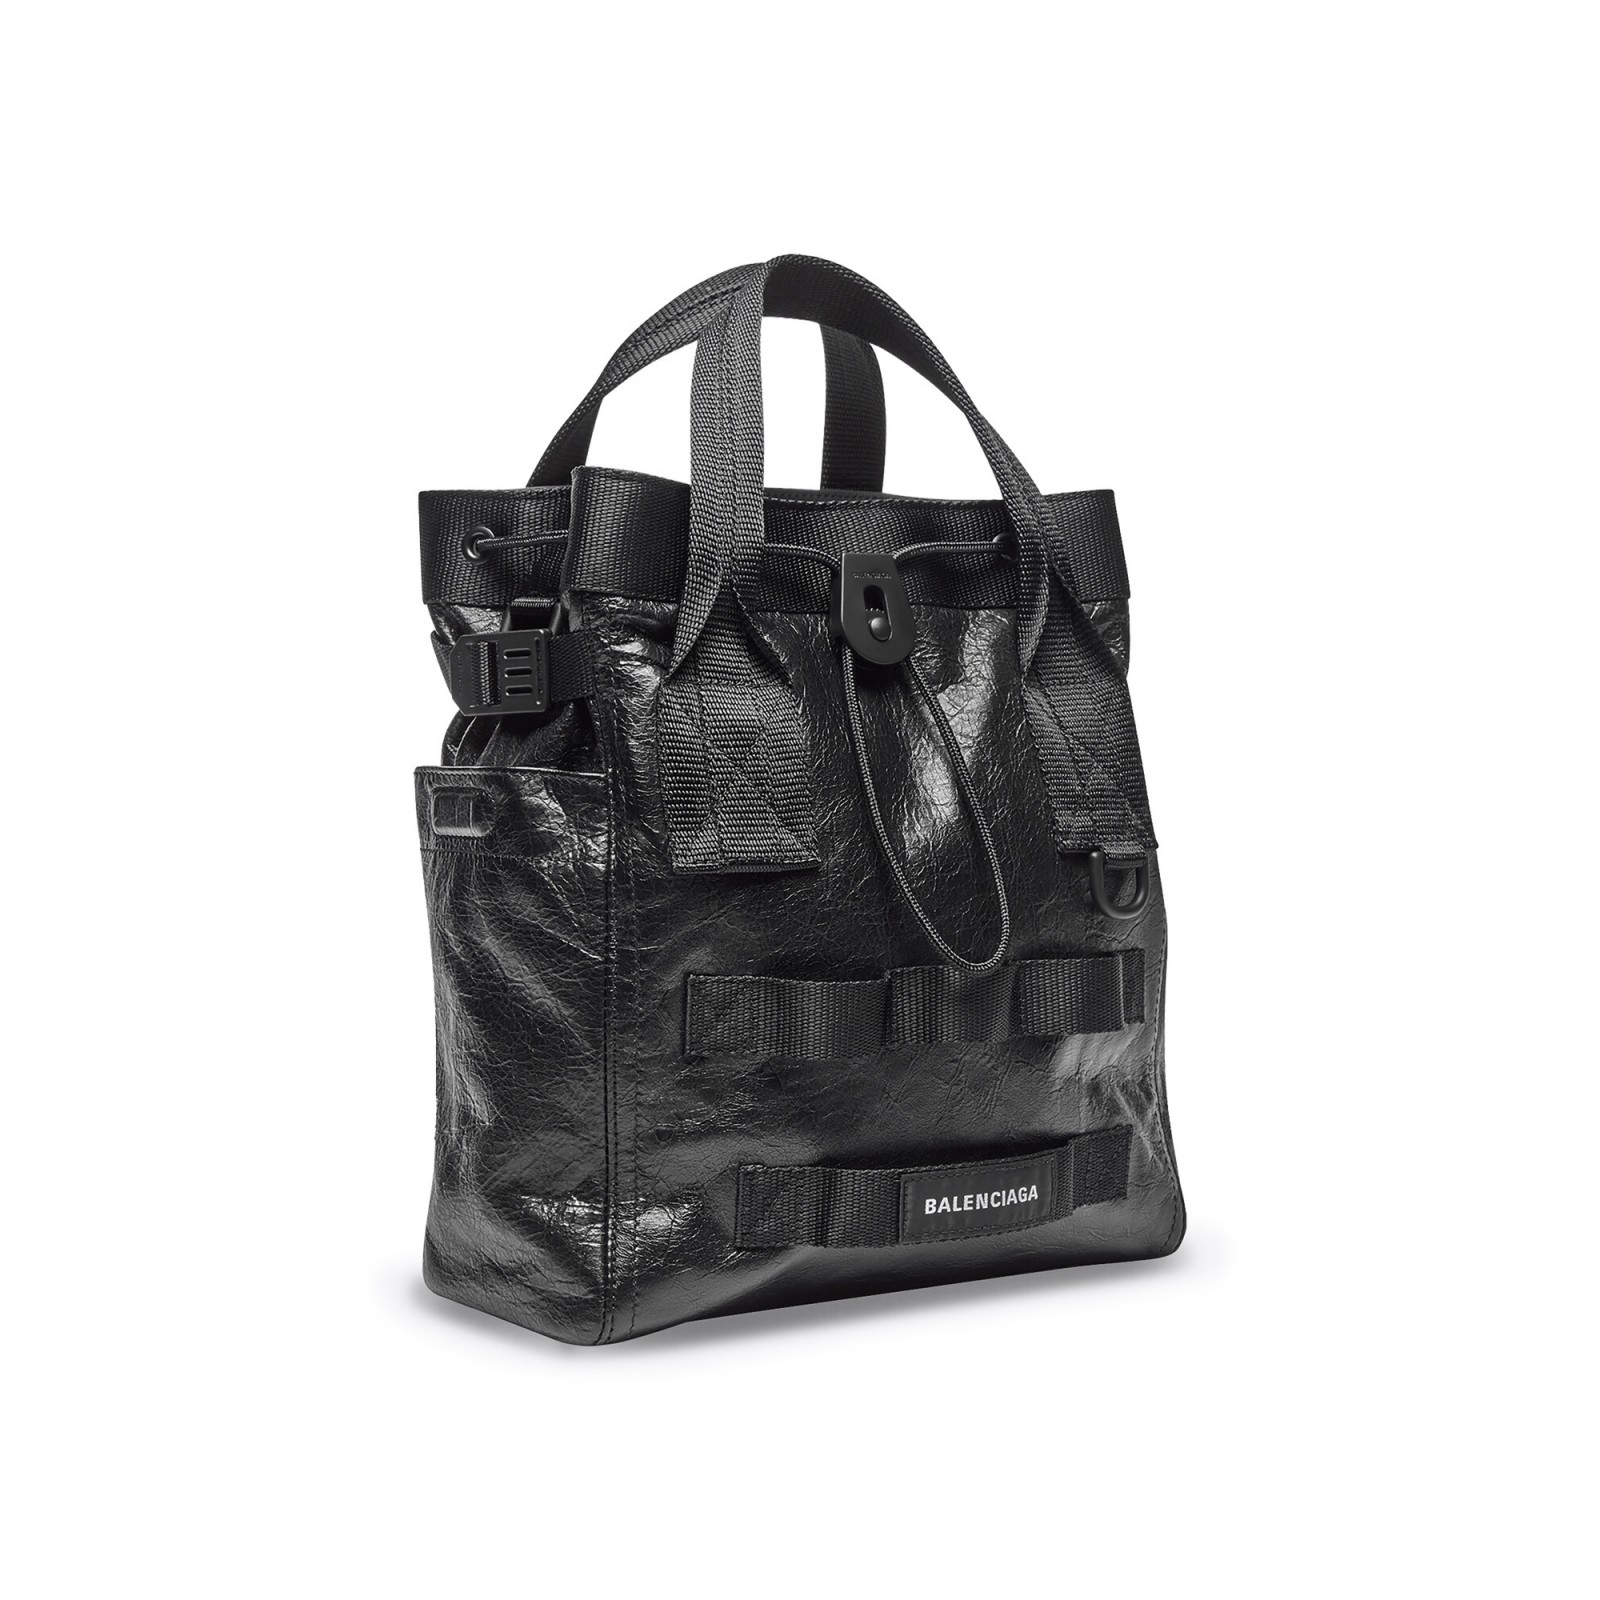 MEN'S ARMY SMALL TOTE BAG